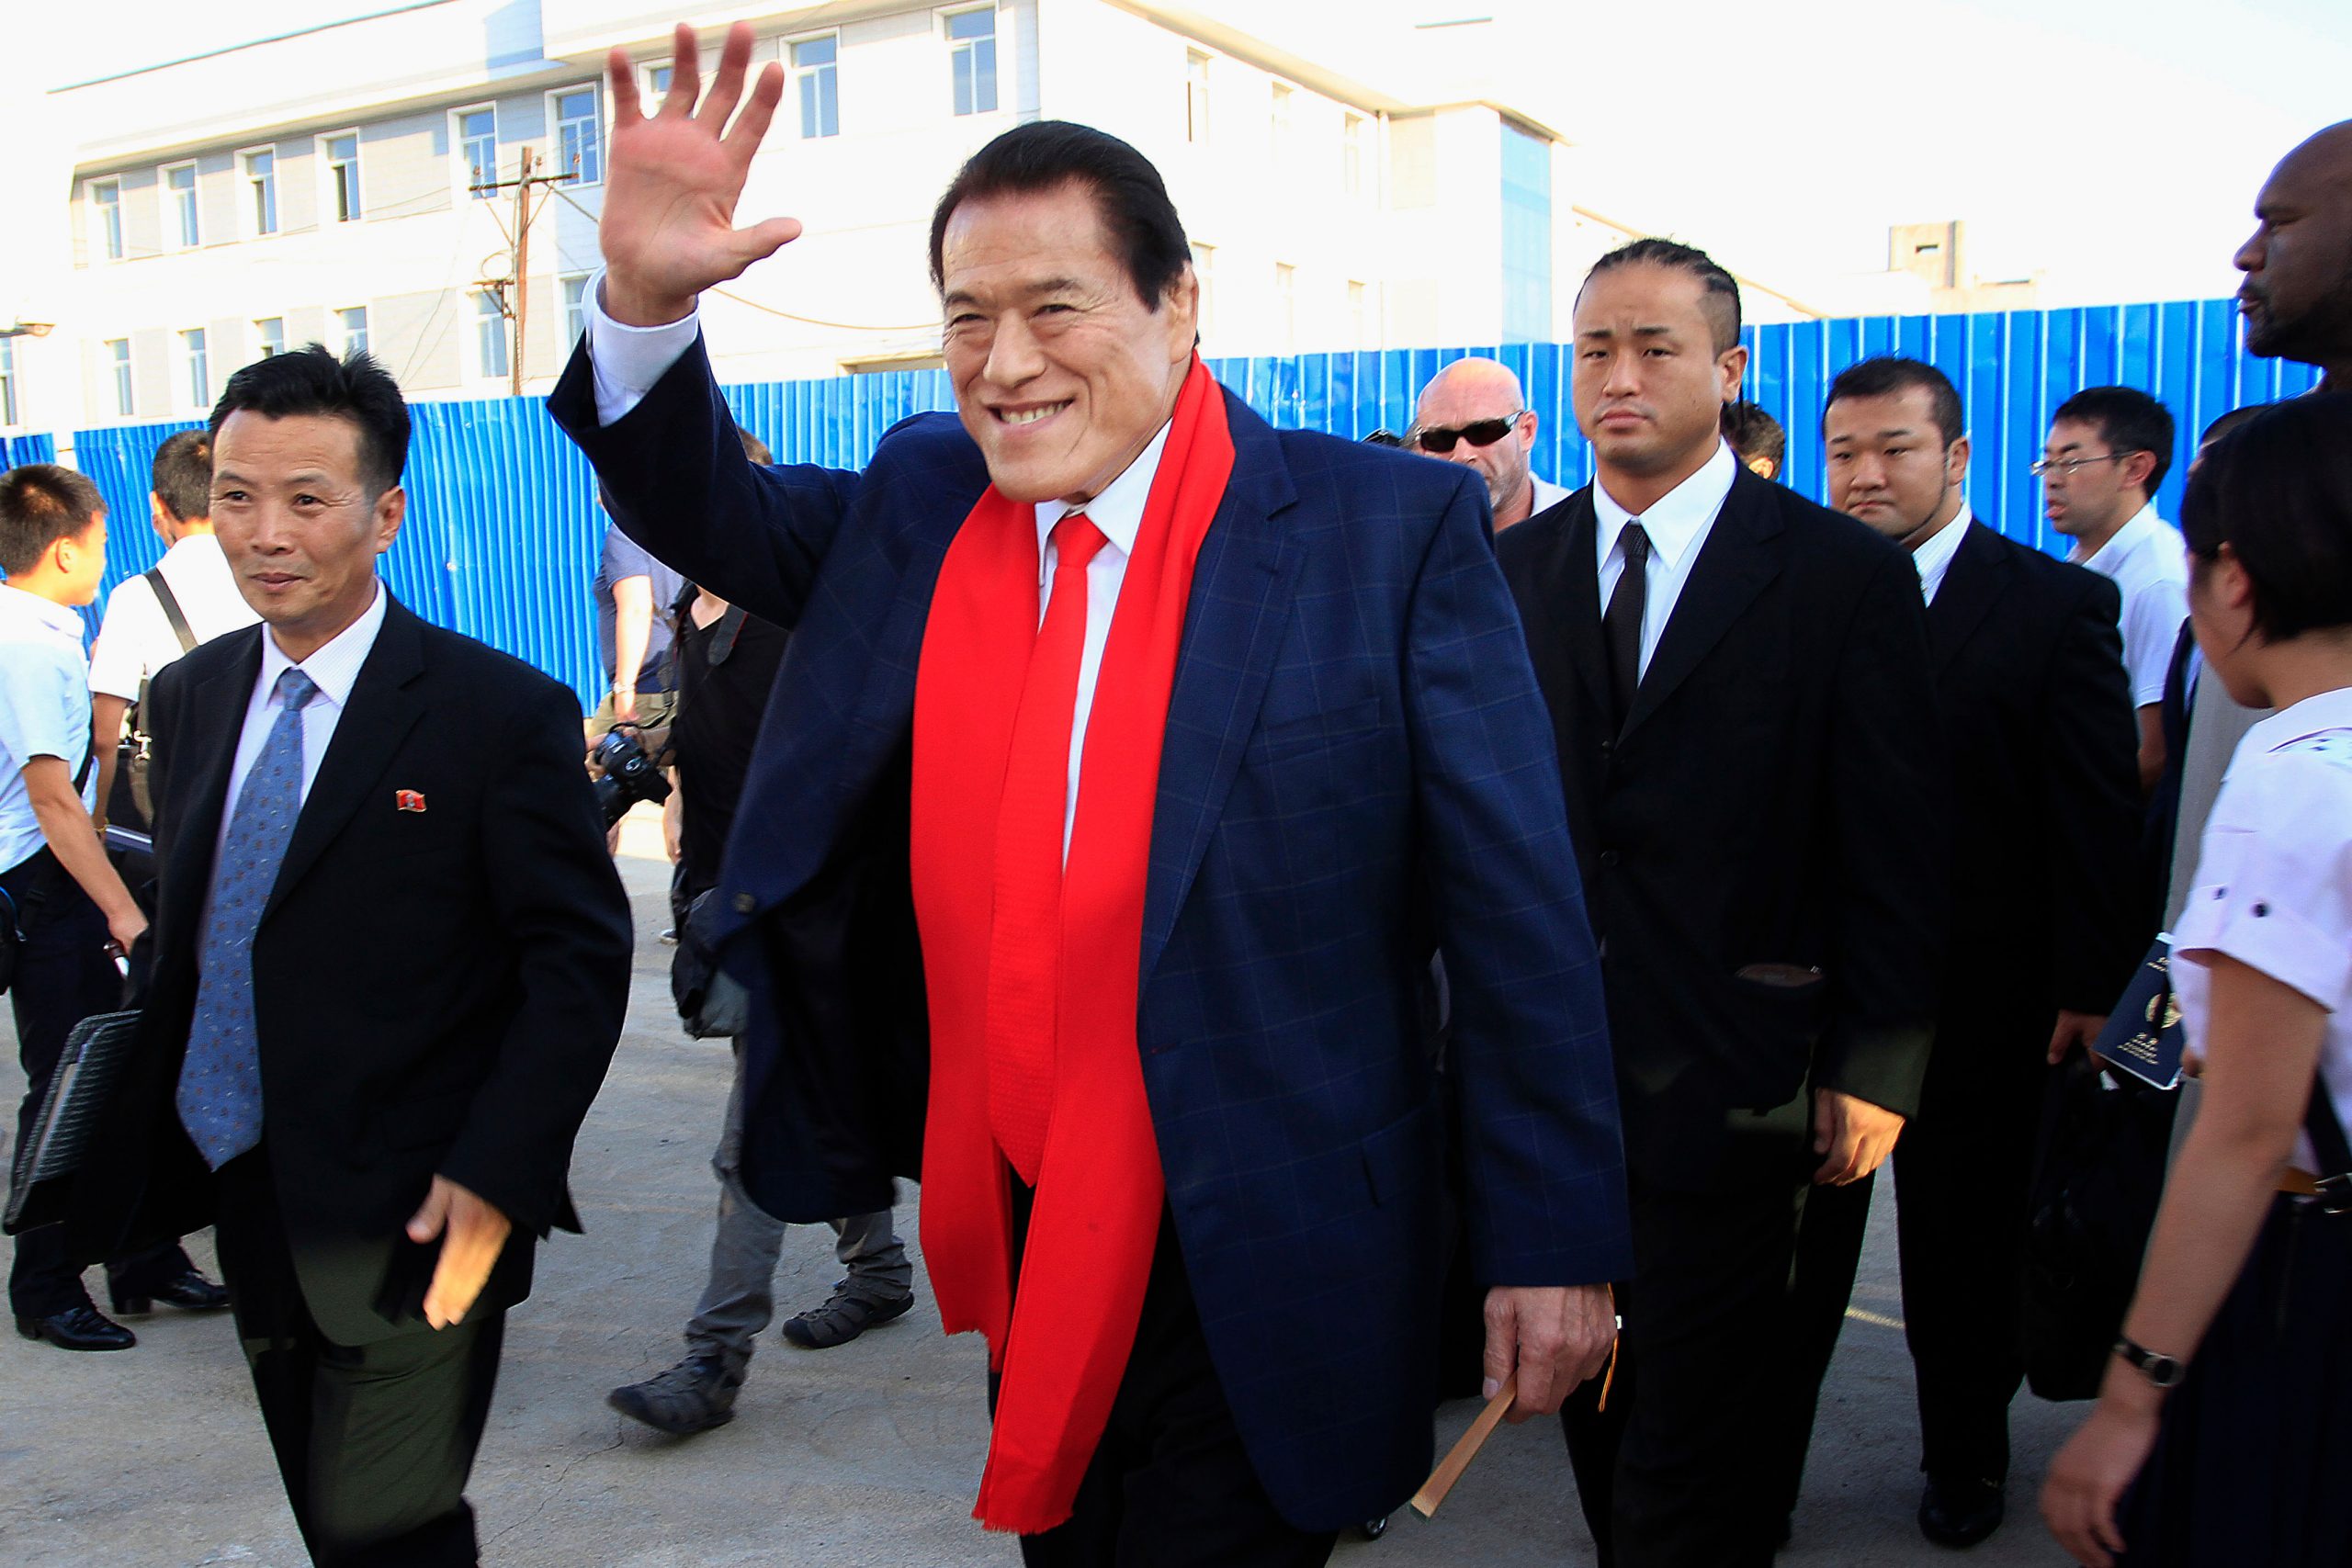 How Antonio Inoki freed Japanese hostages in Iraq during the Gulf War